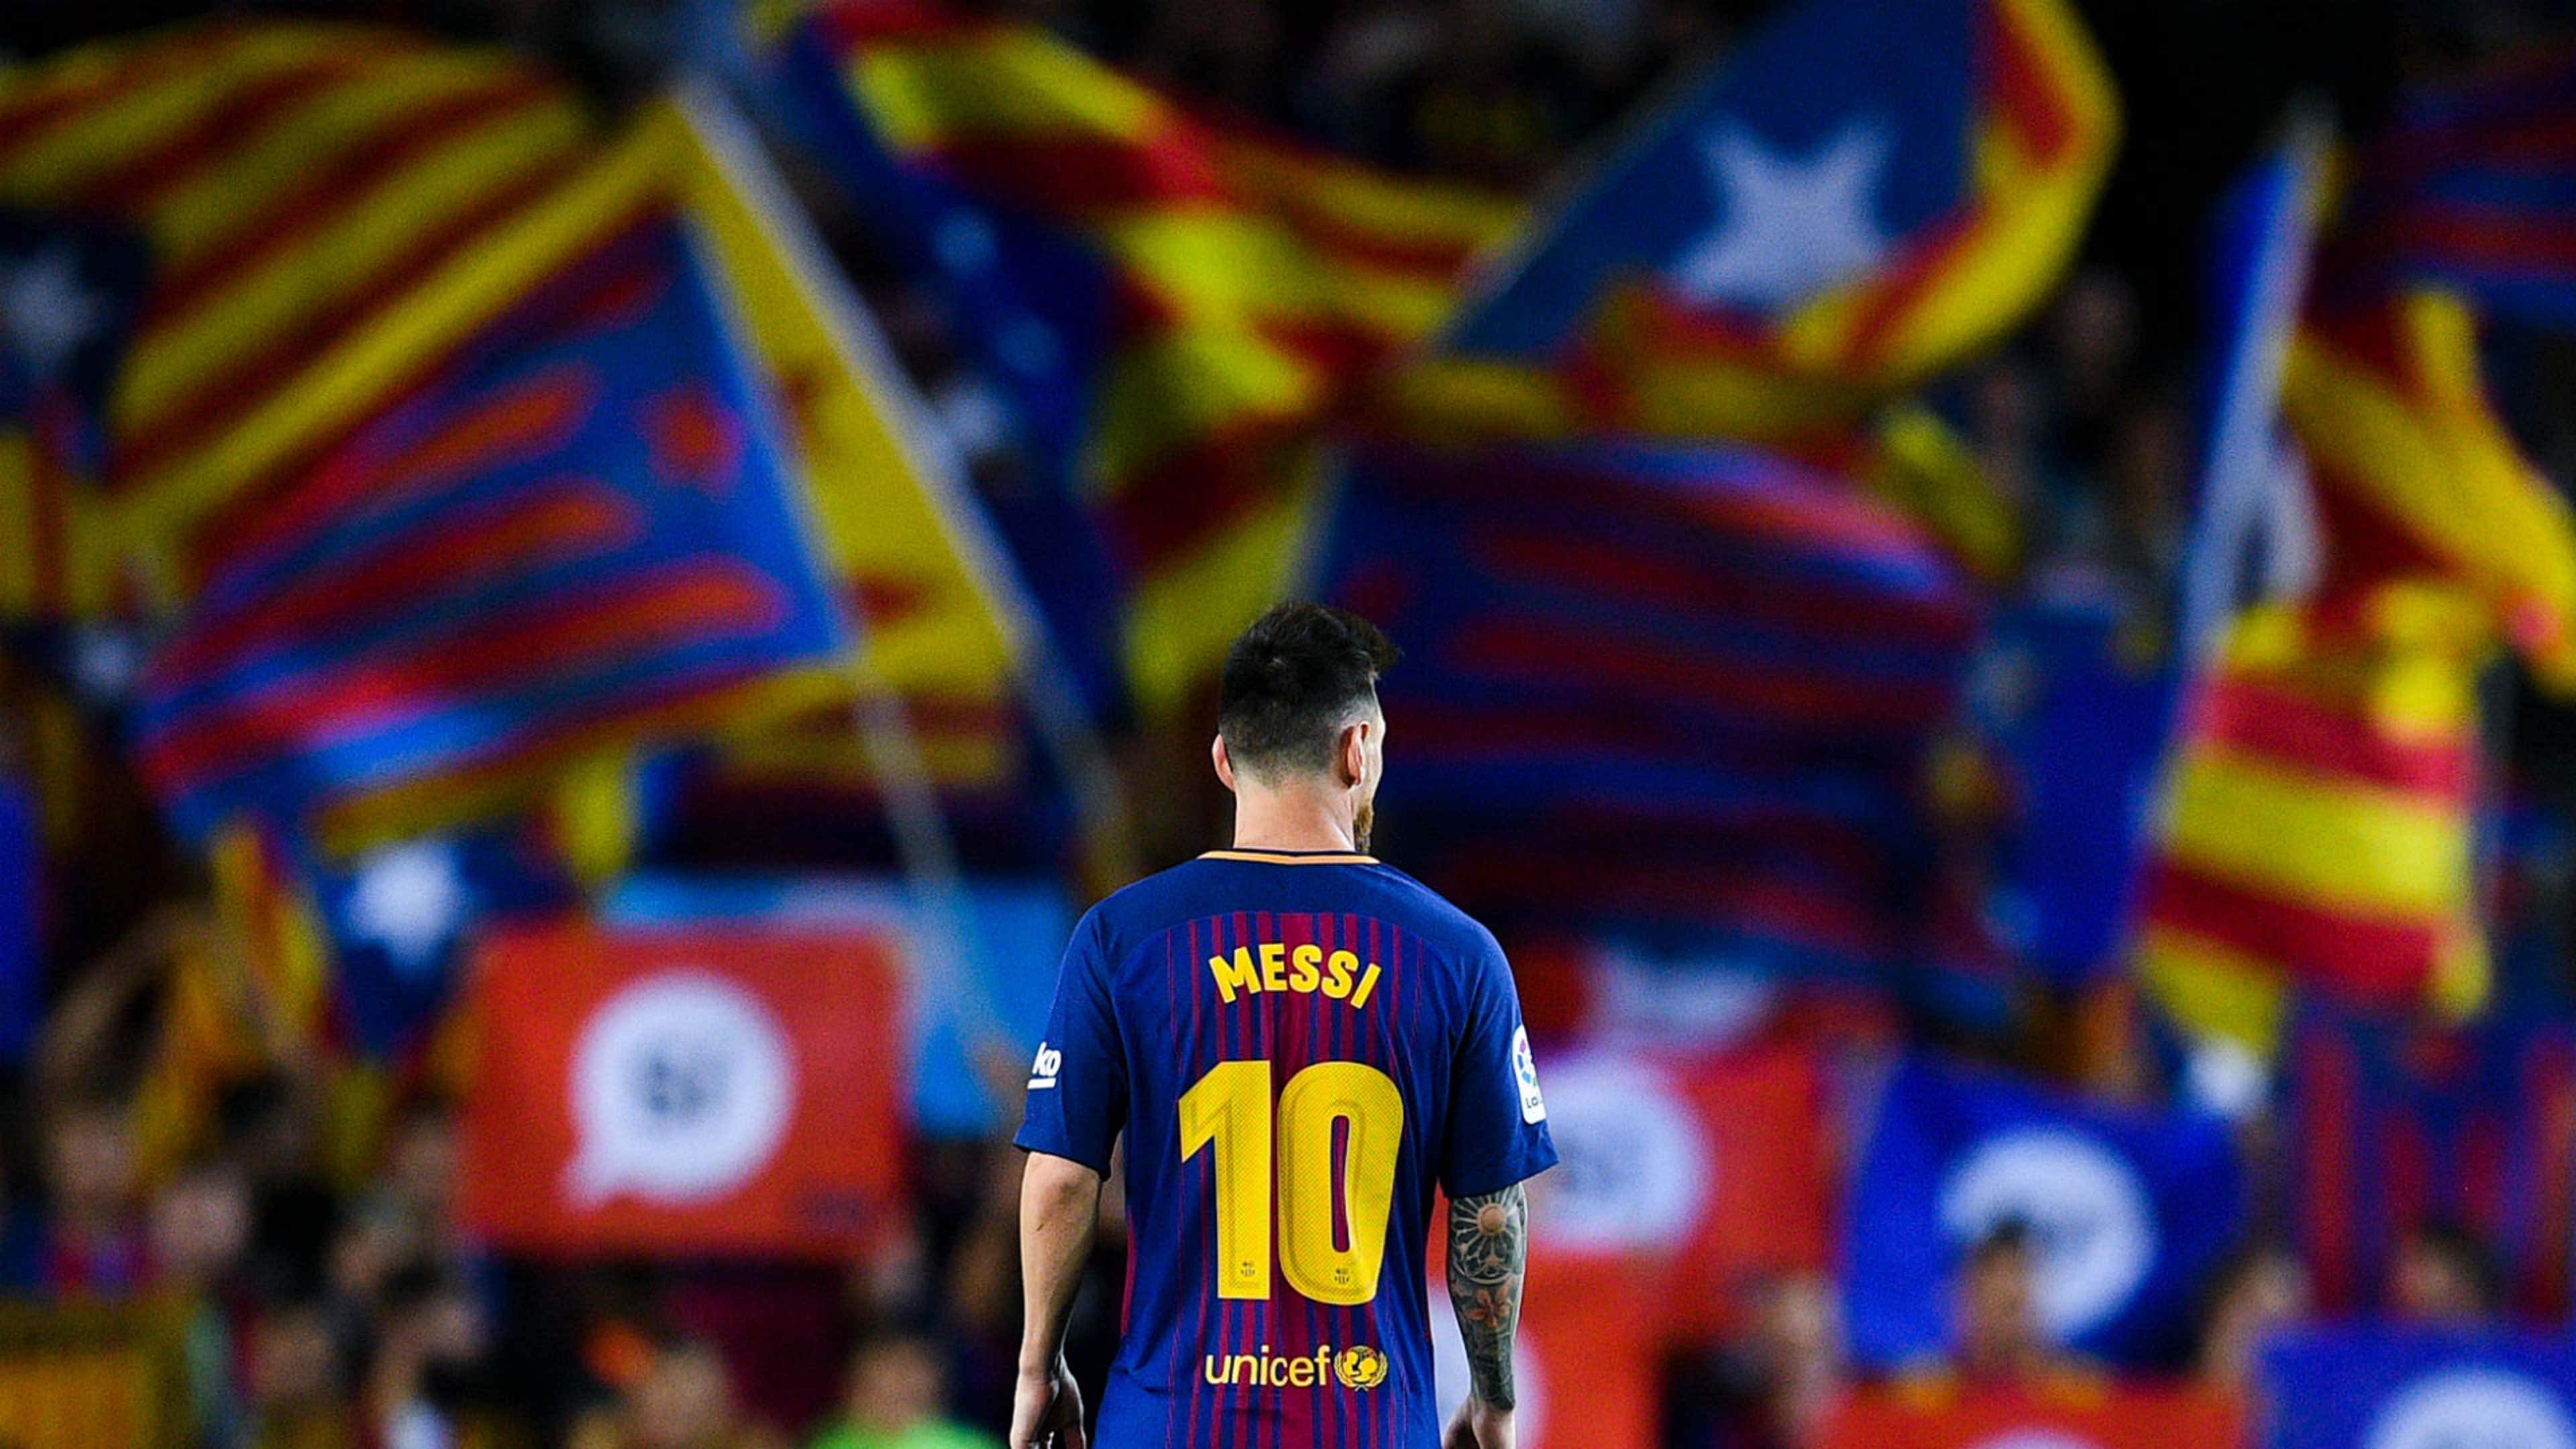 Lionel Messi Barcelona Catalan flags 2017